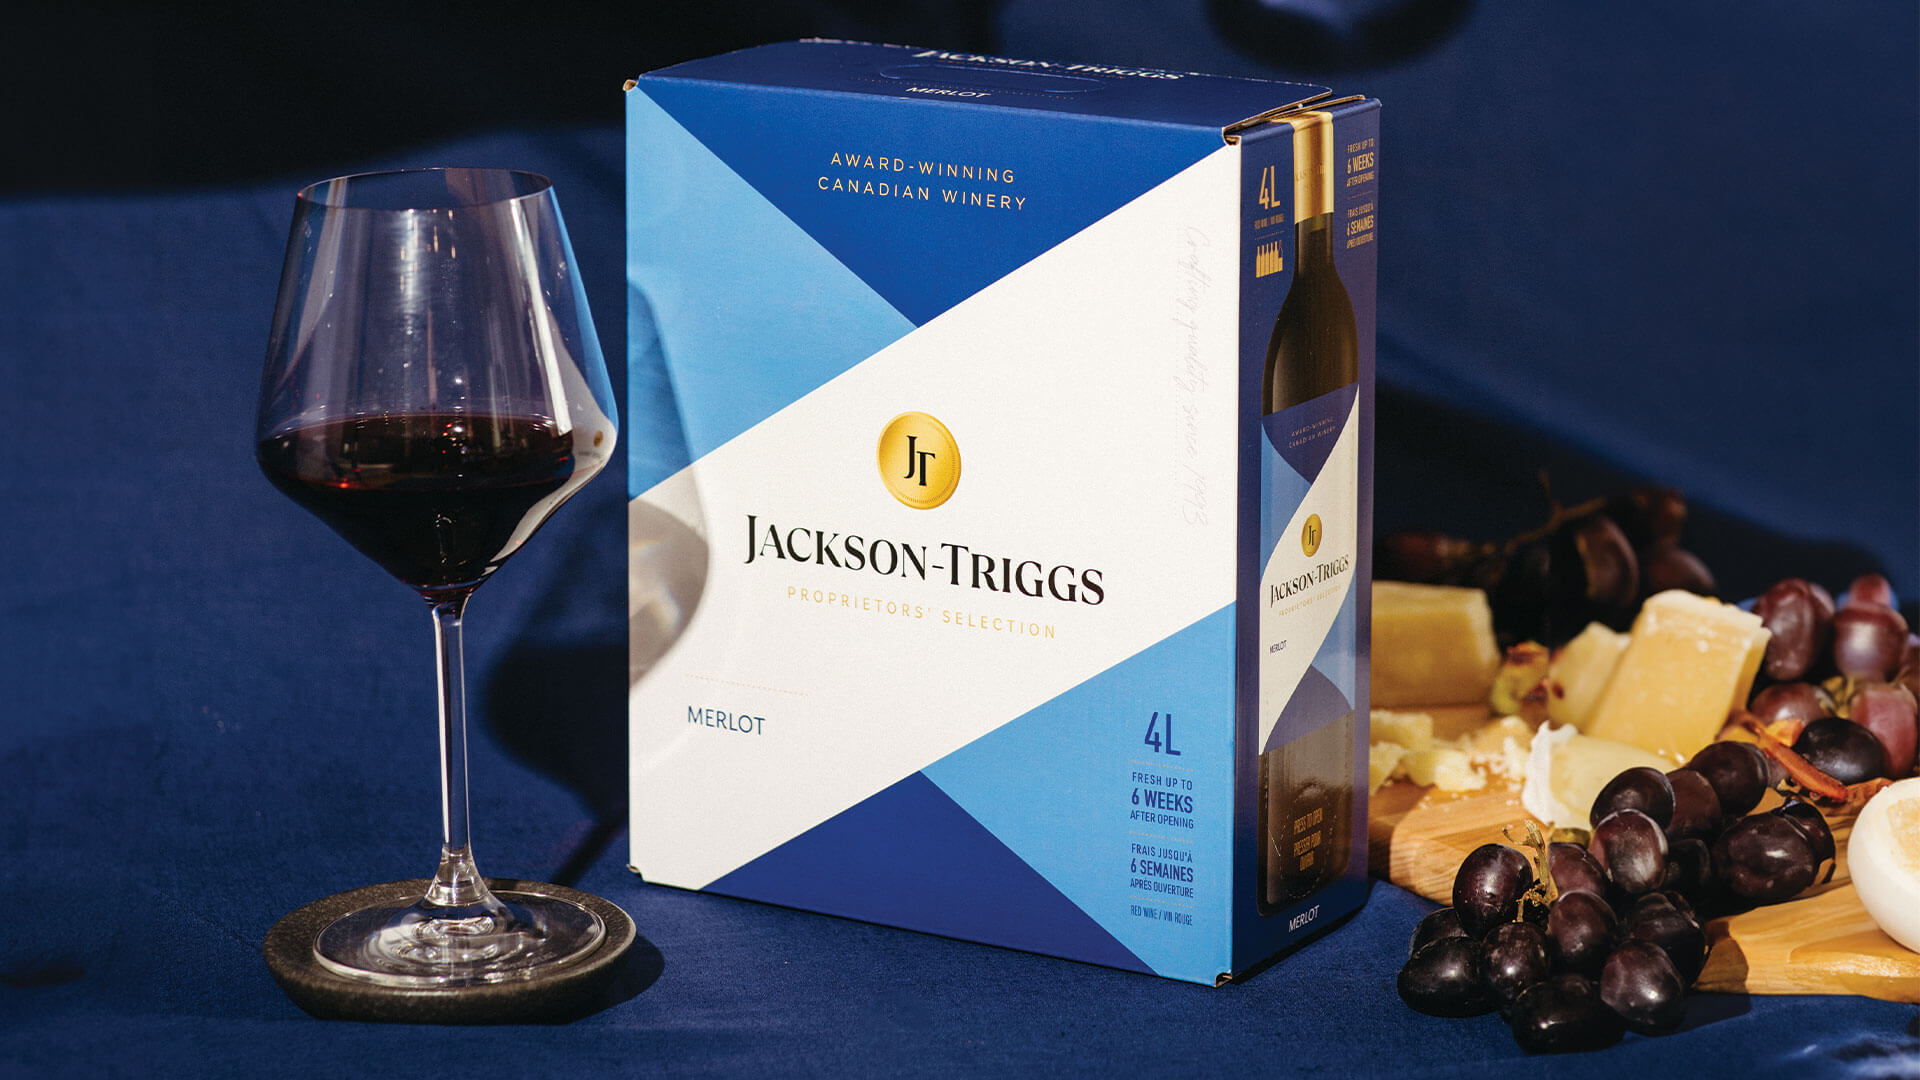 Couple of wine enthusiasts enjoying a glass from the Jackson-Triggs Merlot 4L with some cheese and grapes.  